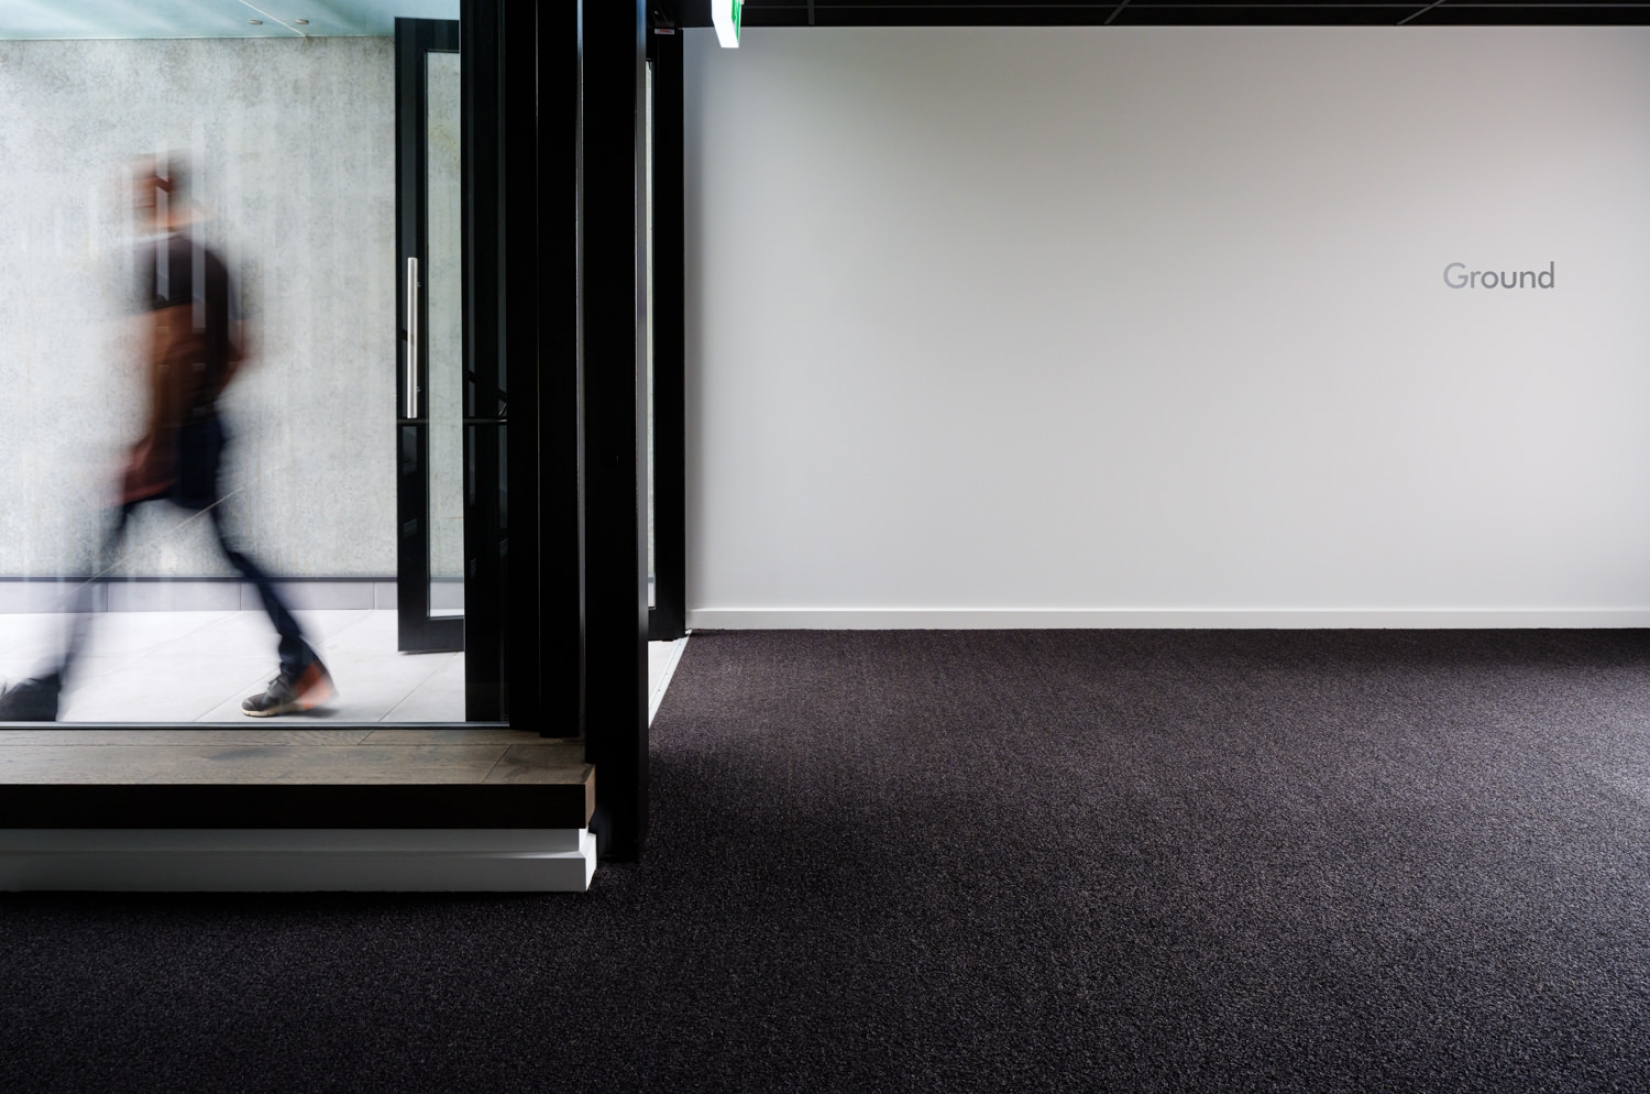 Recycled Products Entrance Matting Carpet Tiles Sustainable